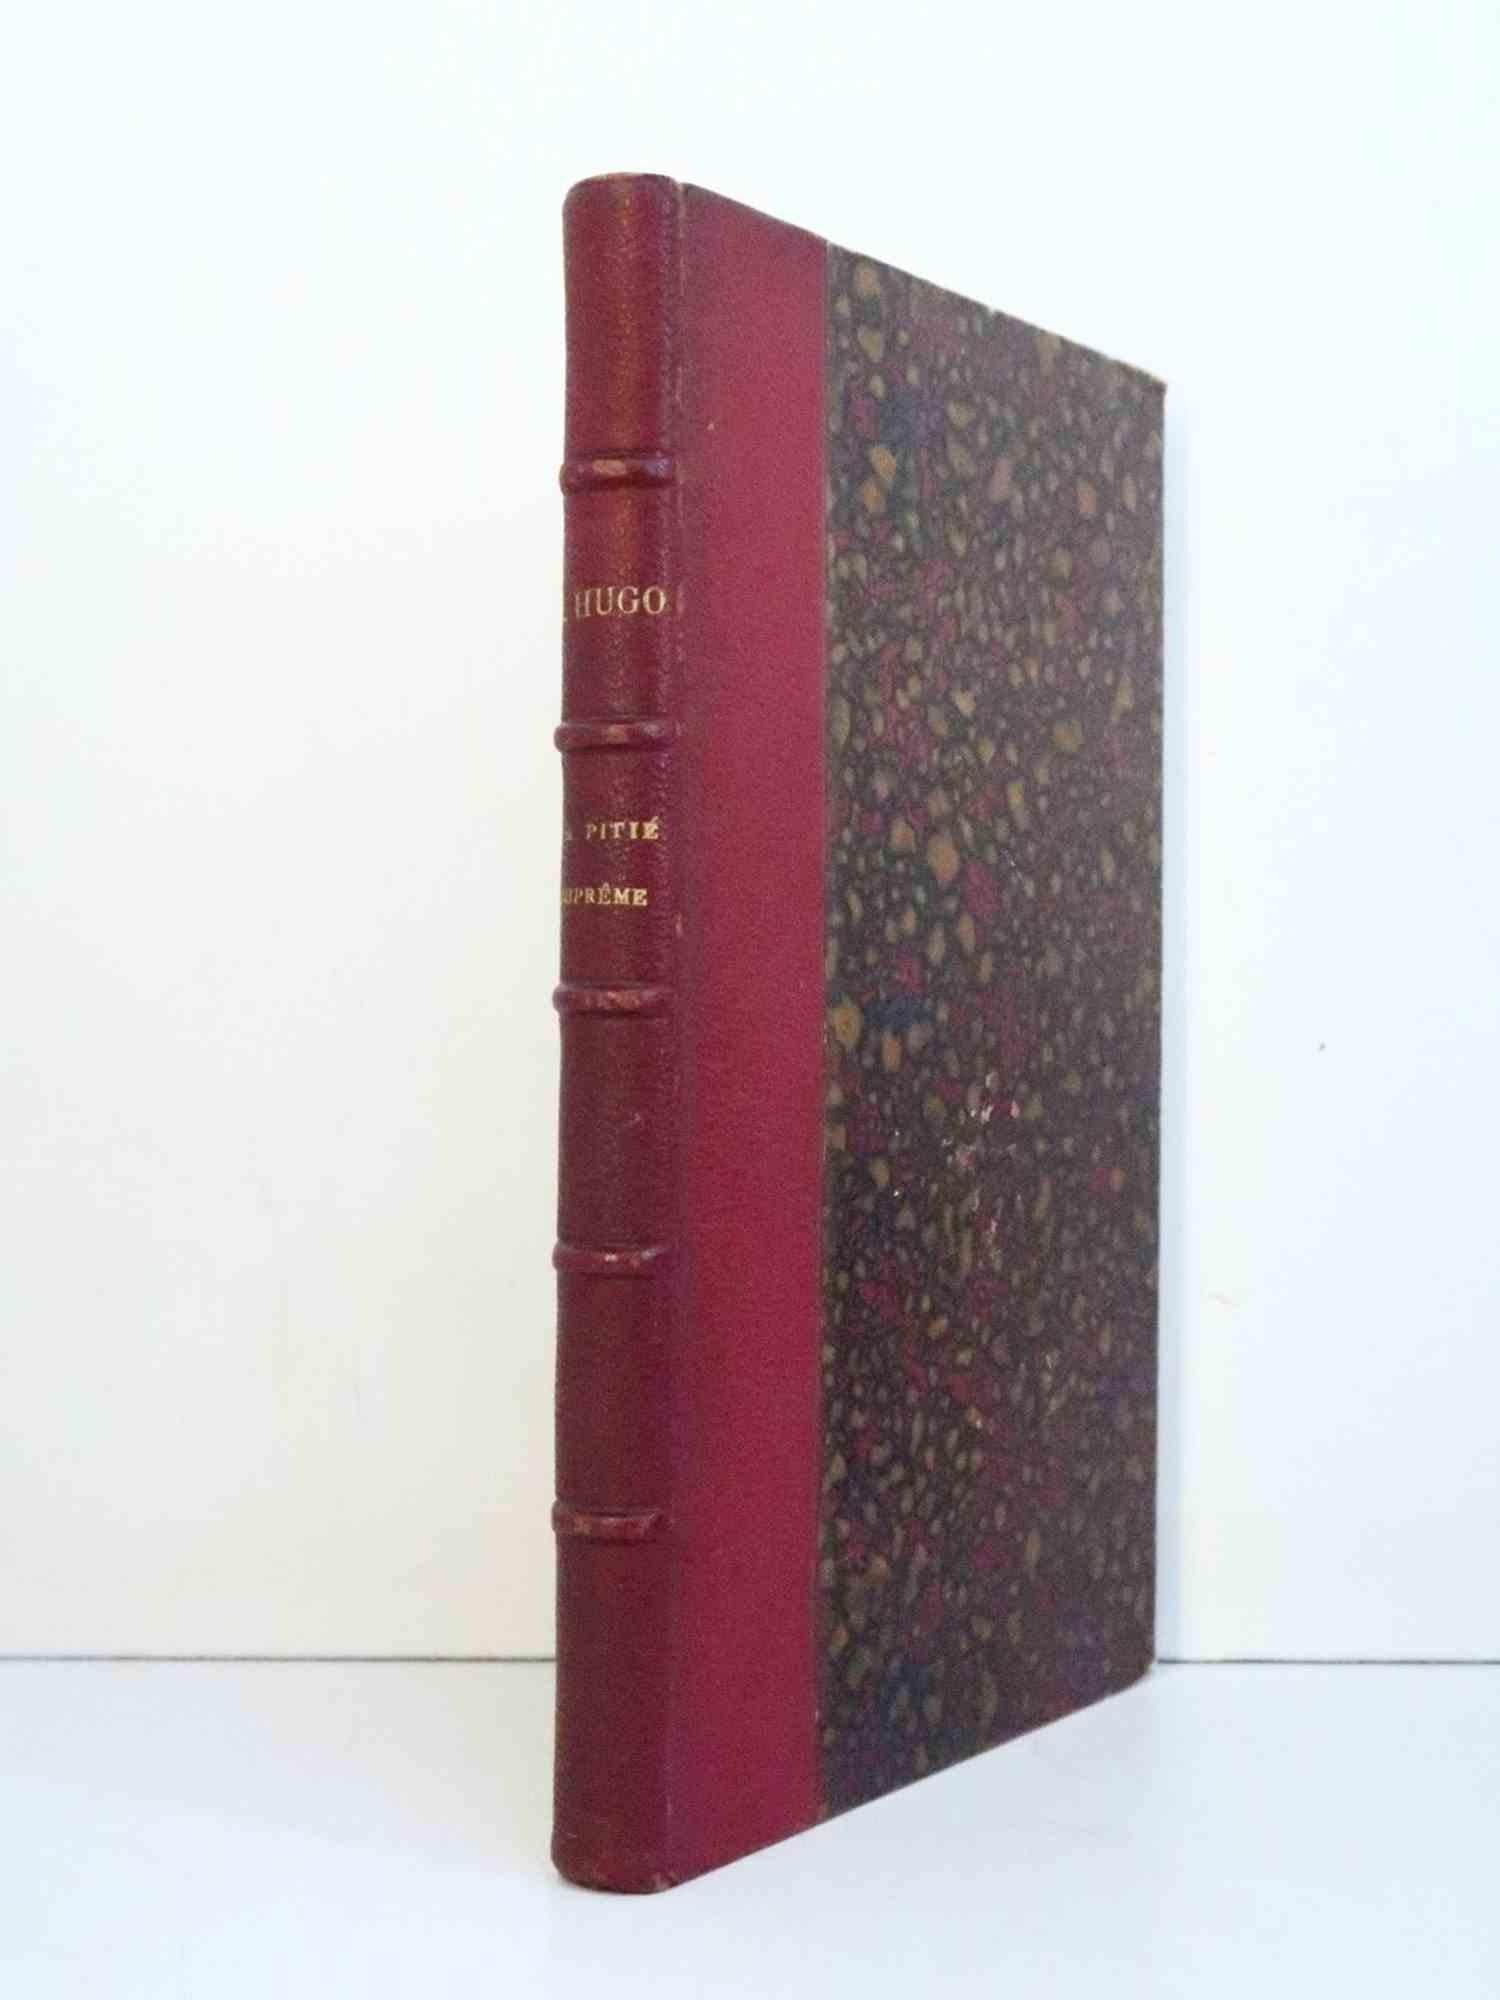 La pitié suprême is a rare book by published in 1879.

Edited by Calman-Levy – Paris.

First edition on “papier courant” after 50 copies on “grand papier” in a coeval half leather binding (original cover included).

Large in 8° (23 x 15 cm.). 142